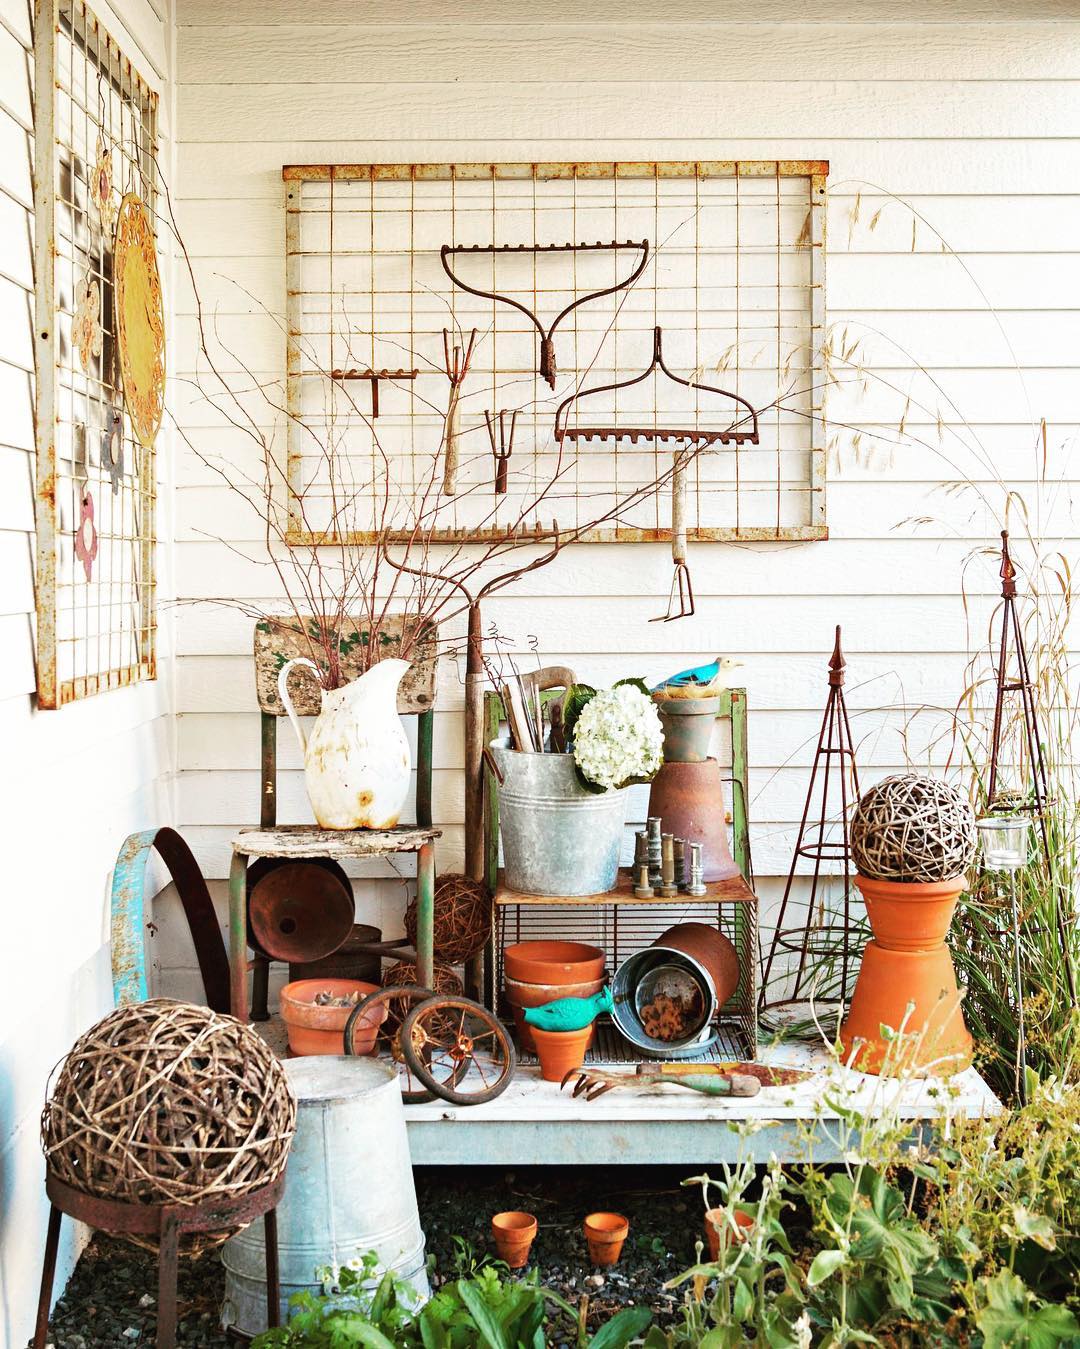 old gardening tools used as decorations photo by Instagram user @cottagesandbungalows